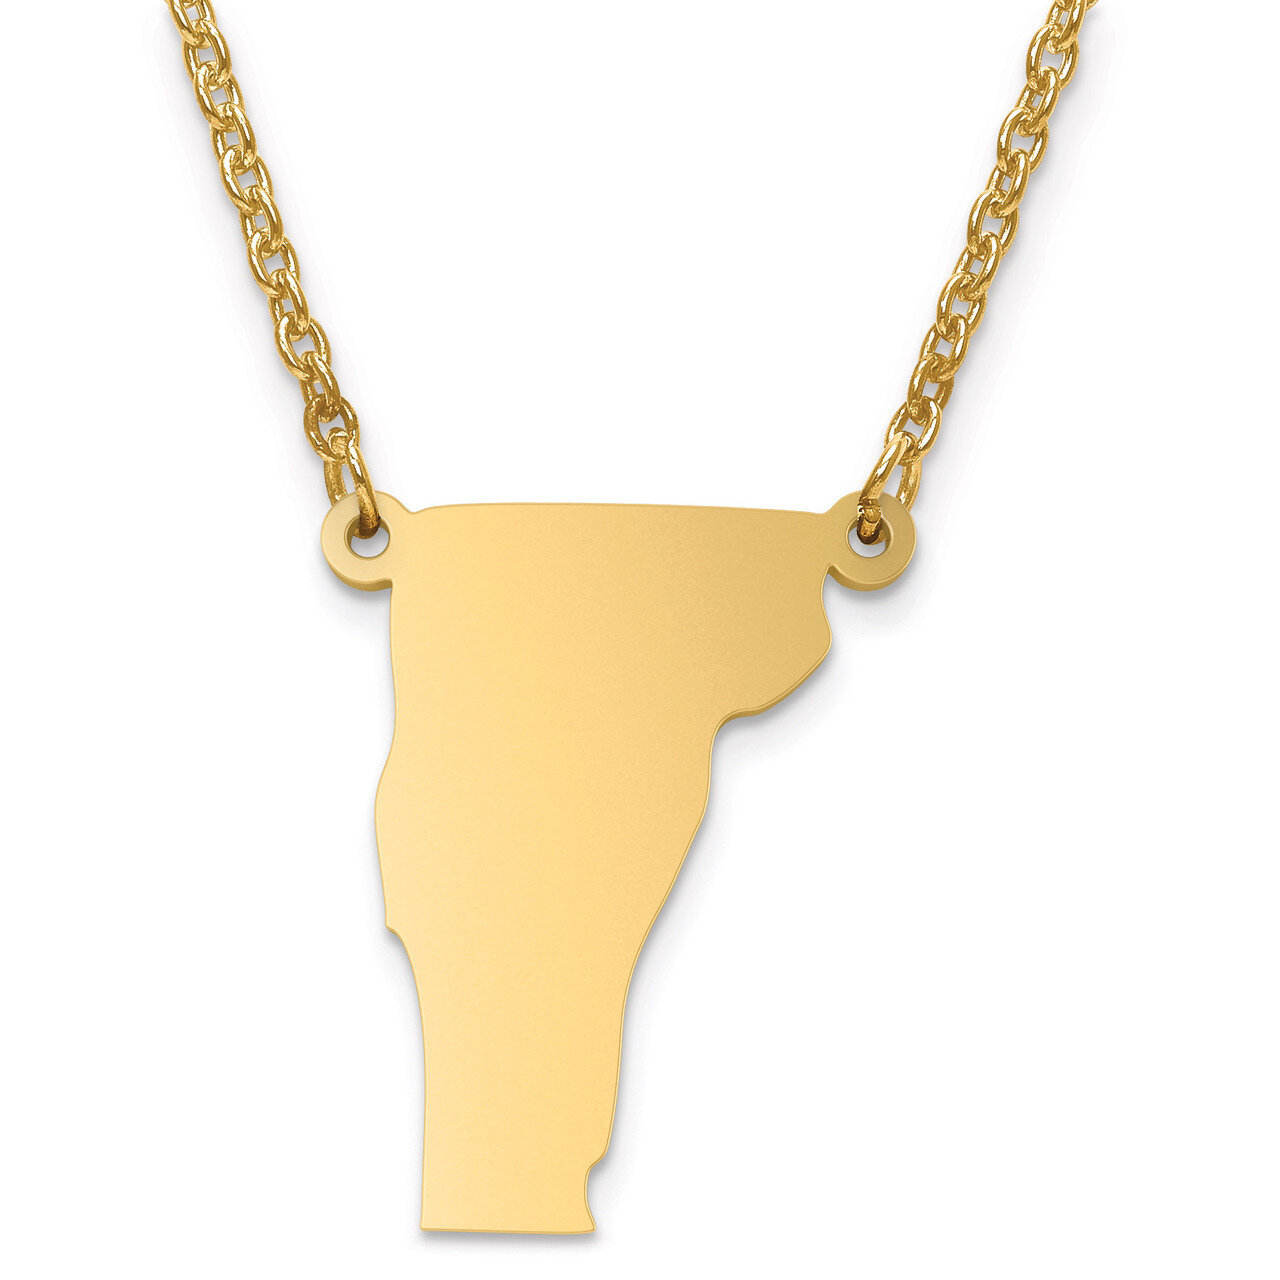 Vermont State Pendant with Chain Engravable Gold-plated on Sterling Silver